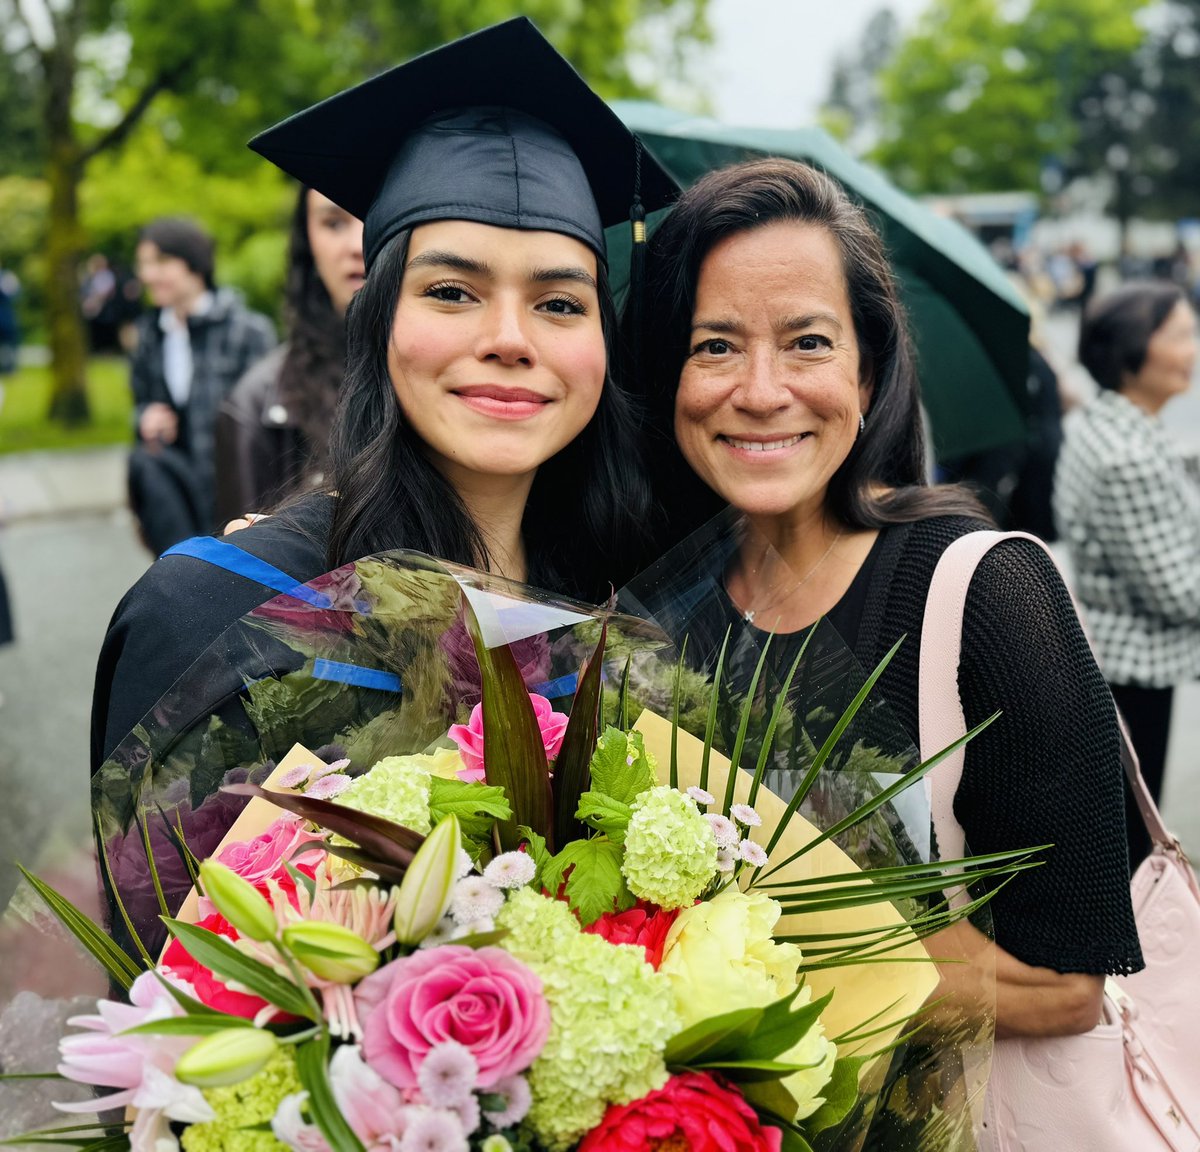 Super duper proud of our beautiful, smart and incredibly kind KK—Kaylene—upon her graduation from @UBC today with a Bachelor of Arts in sociology. Cheering you on as you start this next phase in your life. 🙌🏾 You make us so proud.❤️❤️